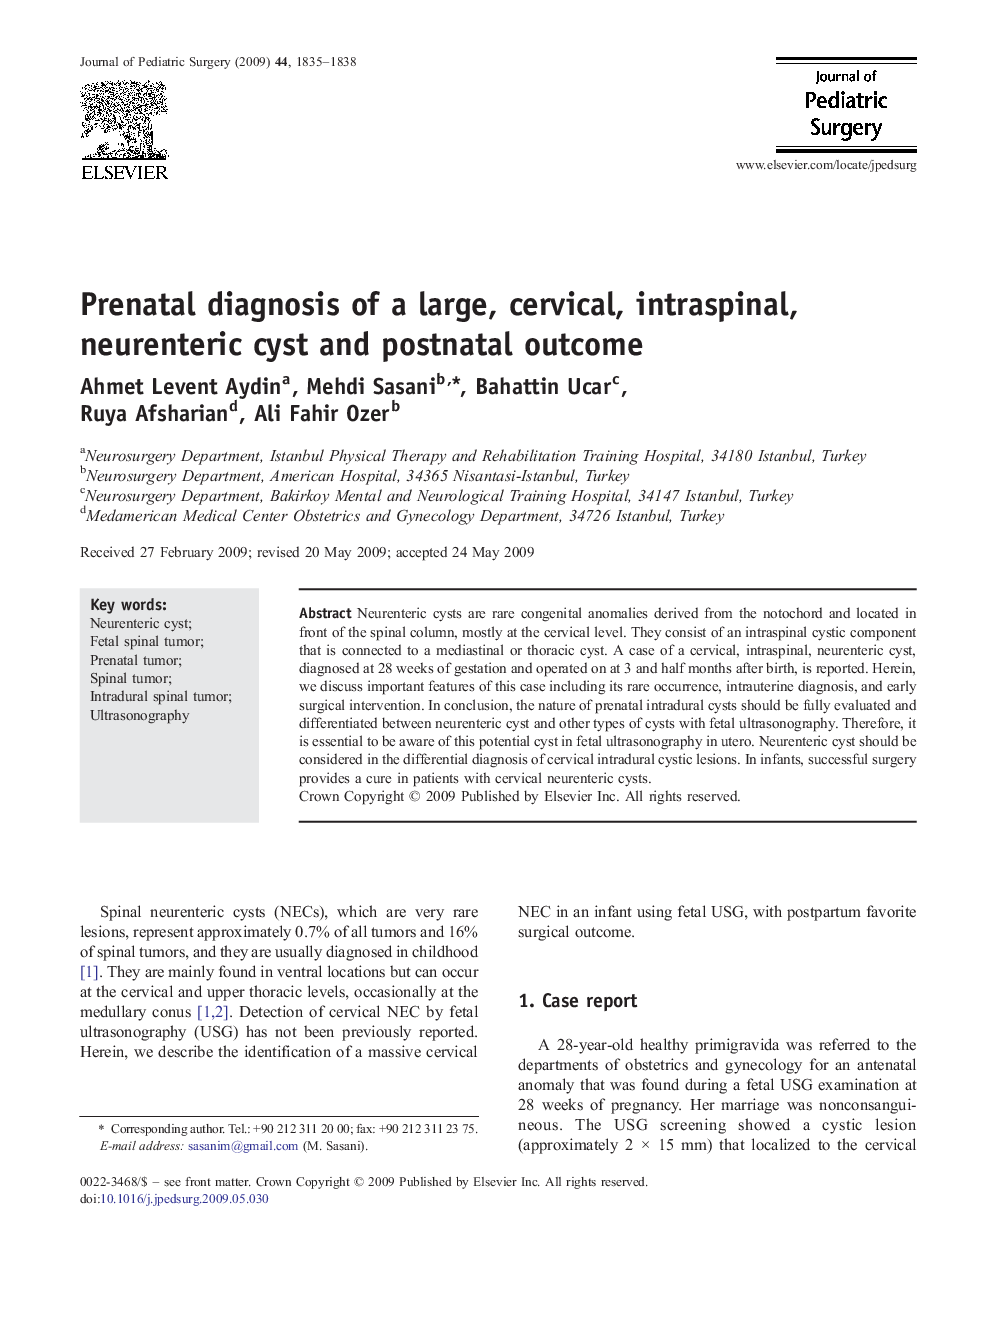 Prenatal diagnosis of a large, cervical, intraspinal, neurenteric cyst and postnatal outcome